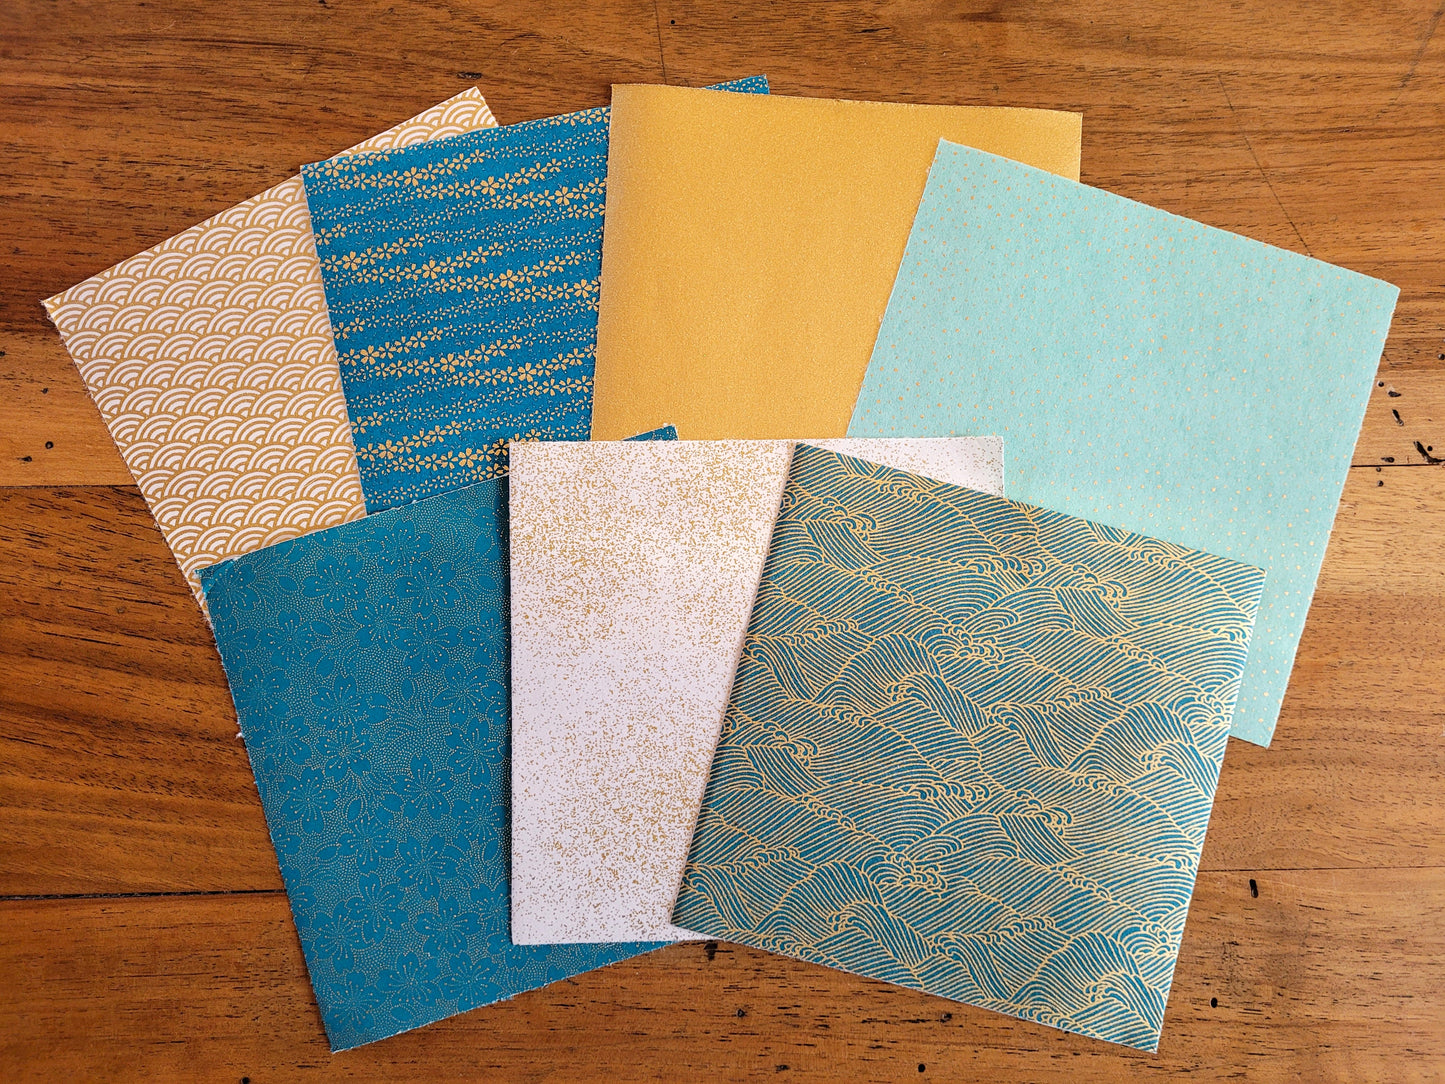 Kit of 7 Japanese origami papers - "Peacock" - Duck blue, white, gold